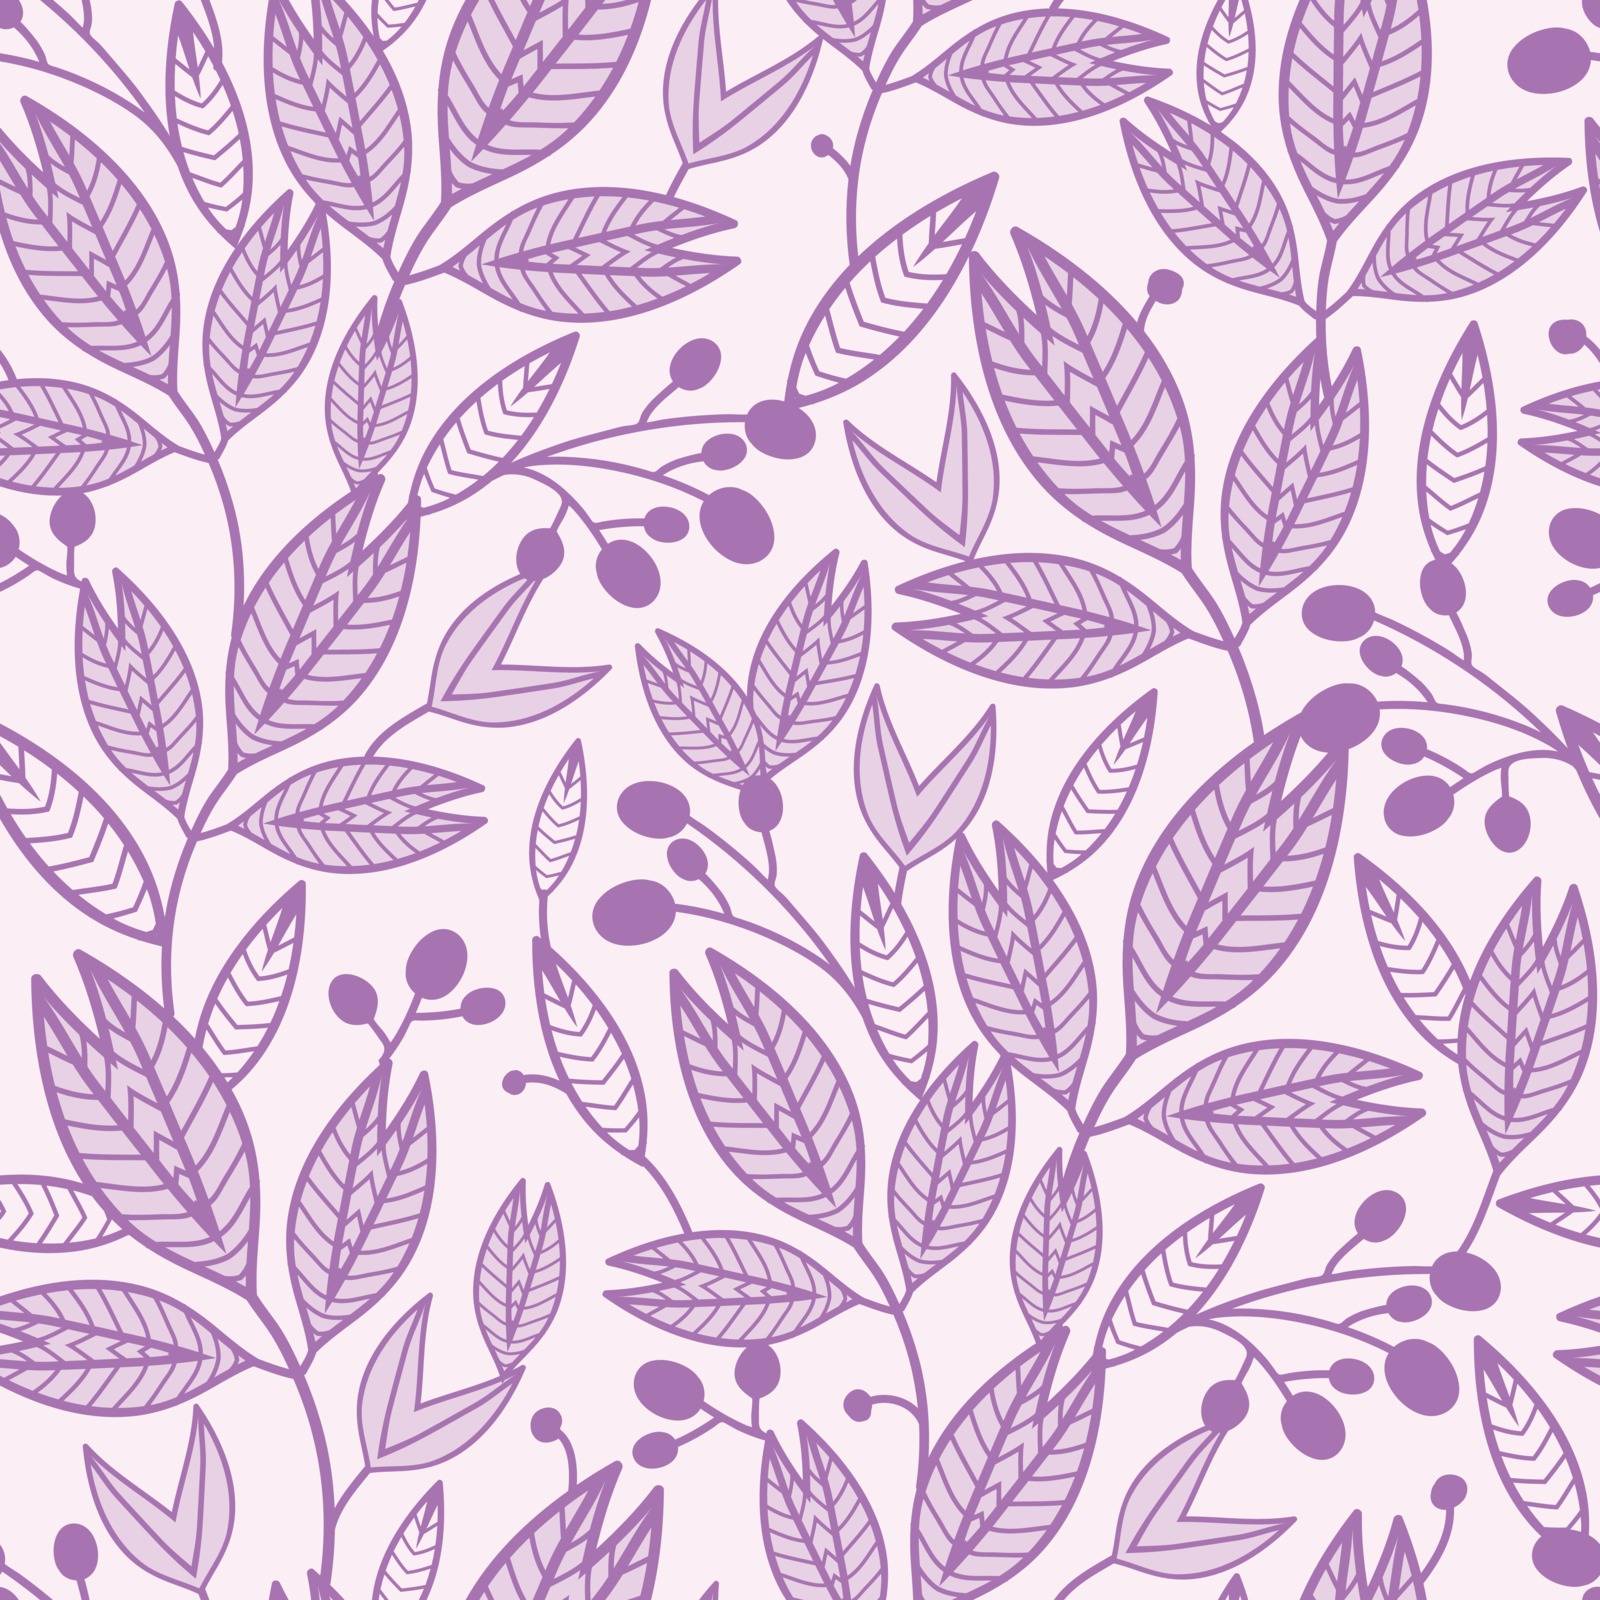 vector striped leaves and berries seamless pattern background